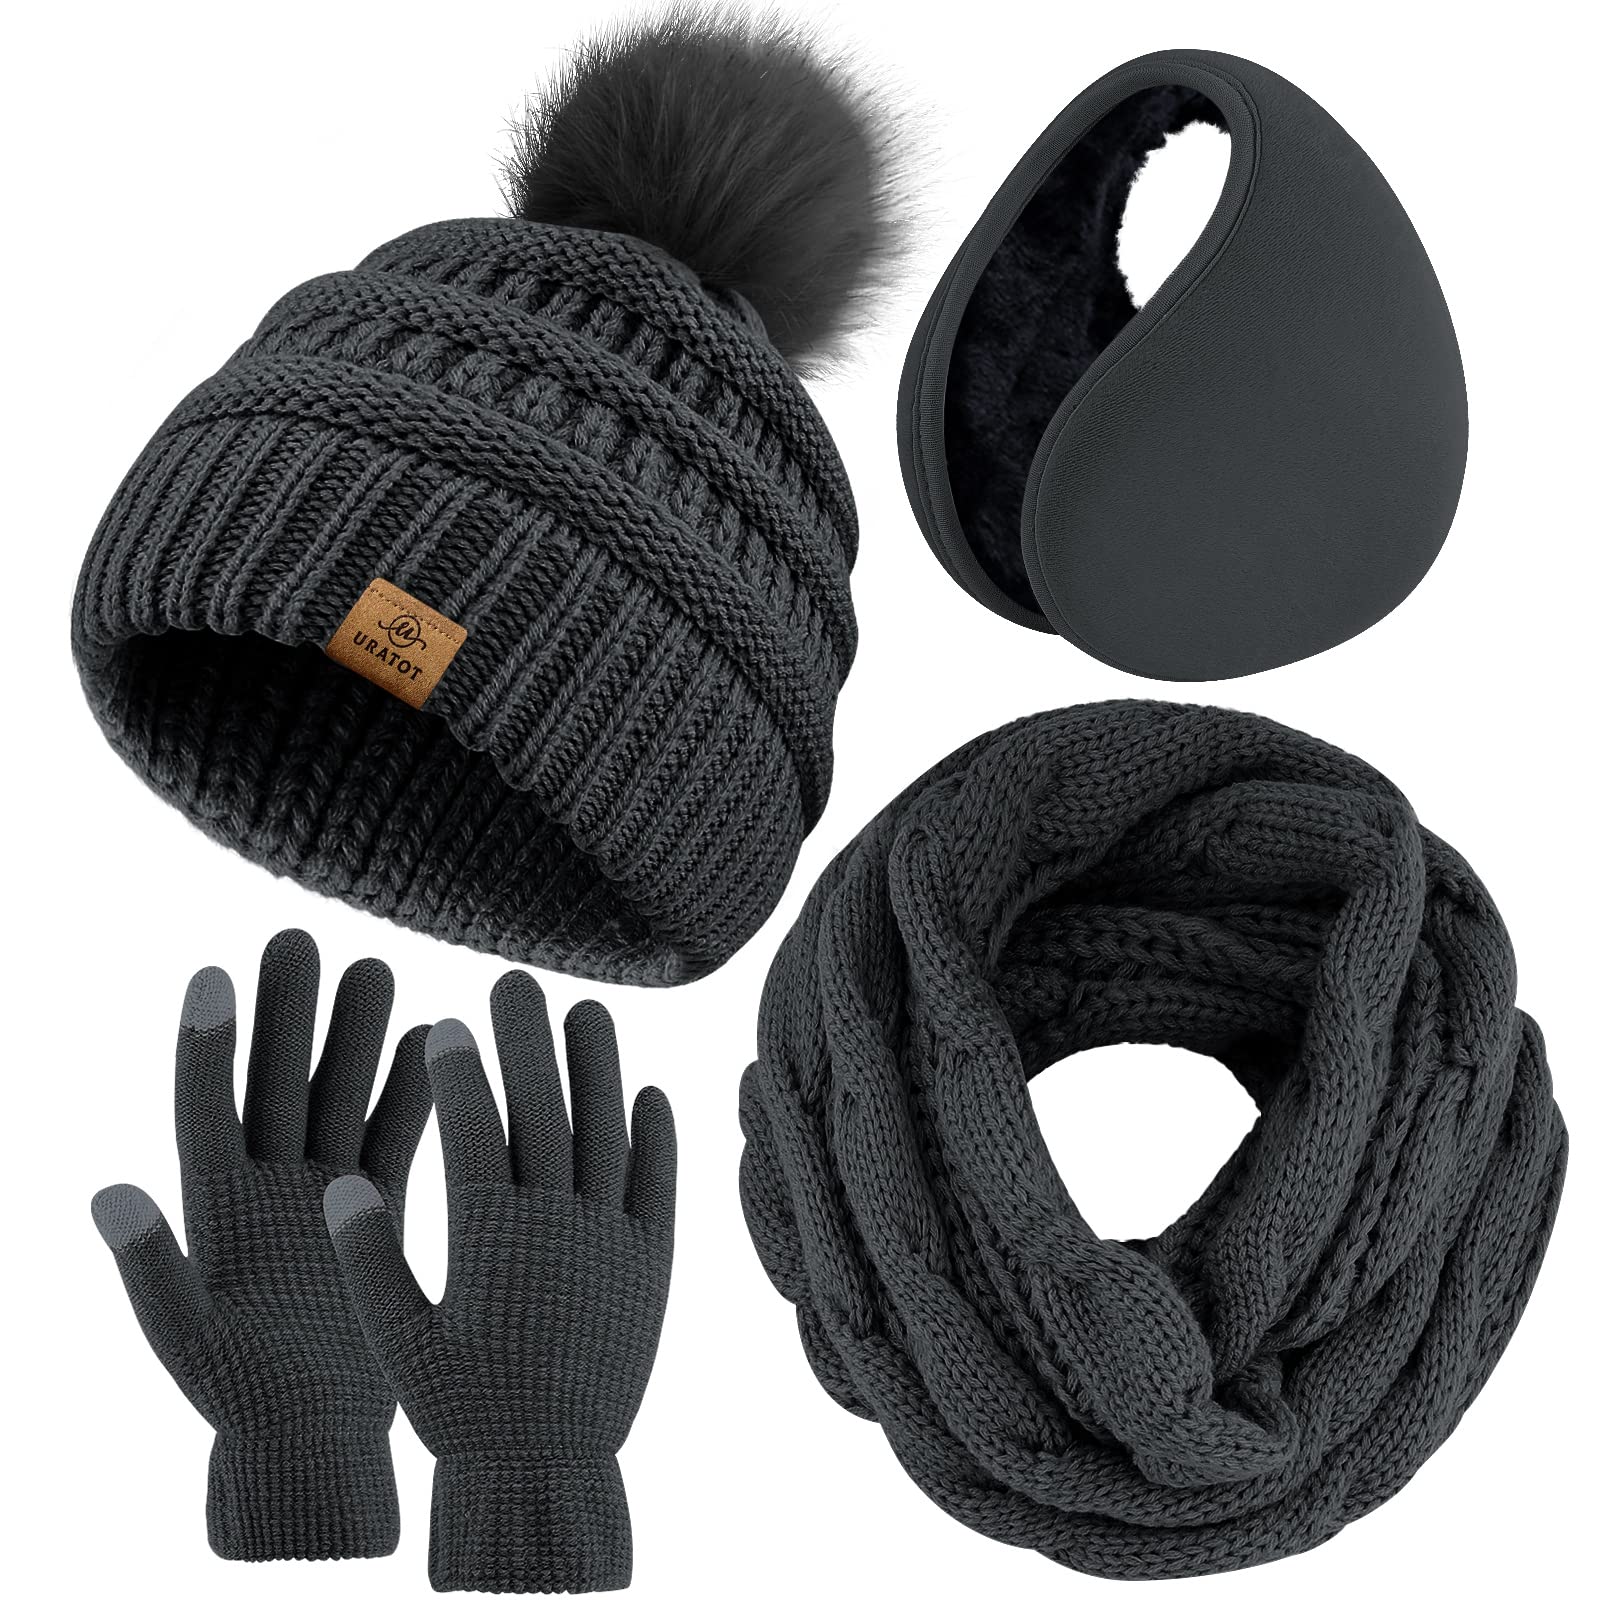 URATOT Winter Warm Sets Knitted Scarf Beanie Pompom Hat Touch Screen Gloves and Winter Ear Warmer Set for Men or Women